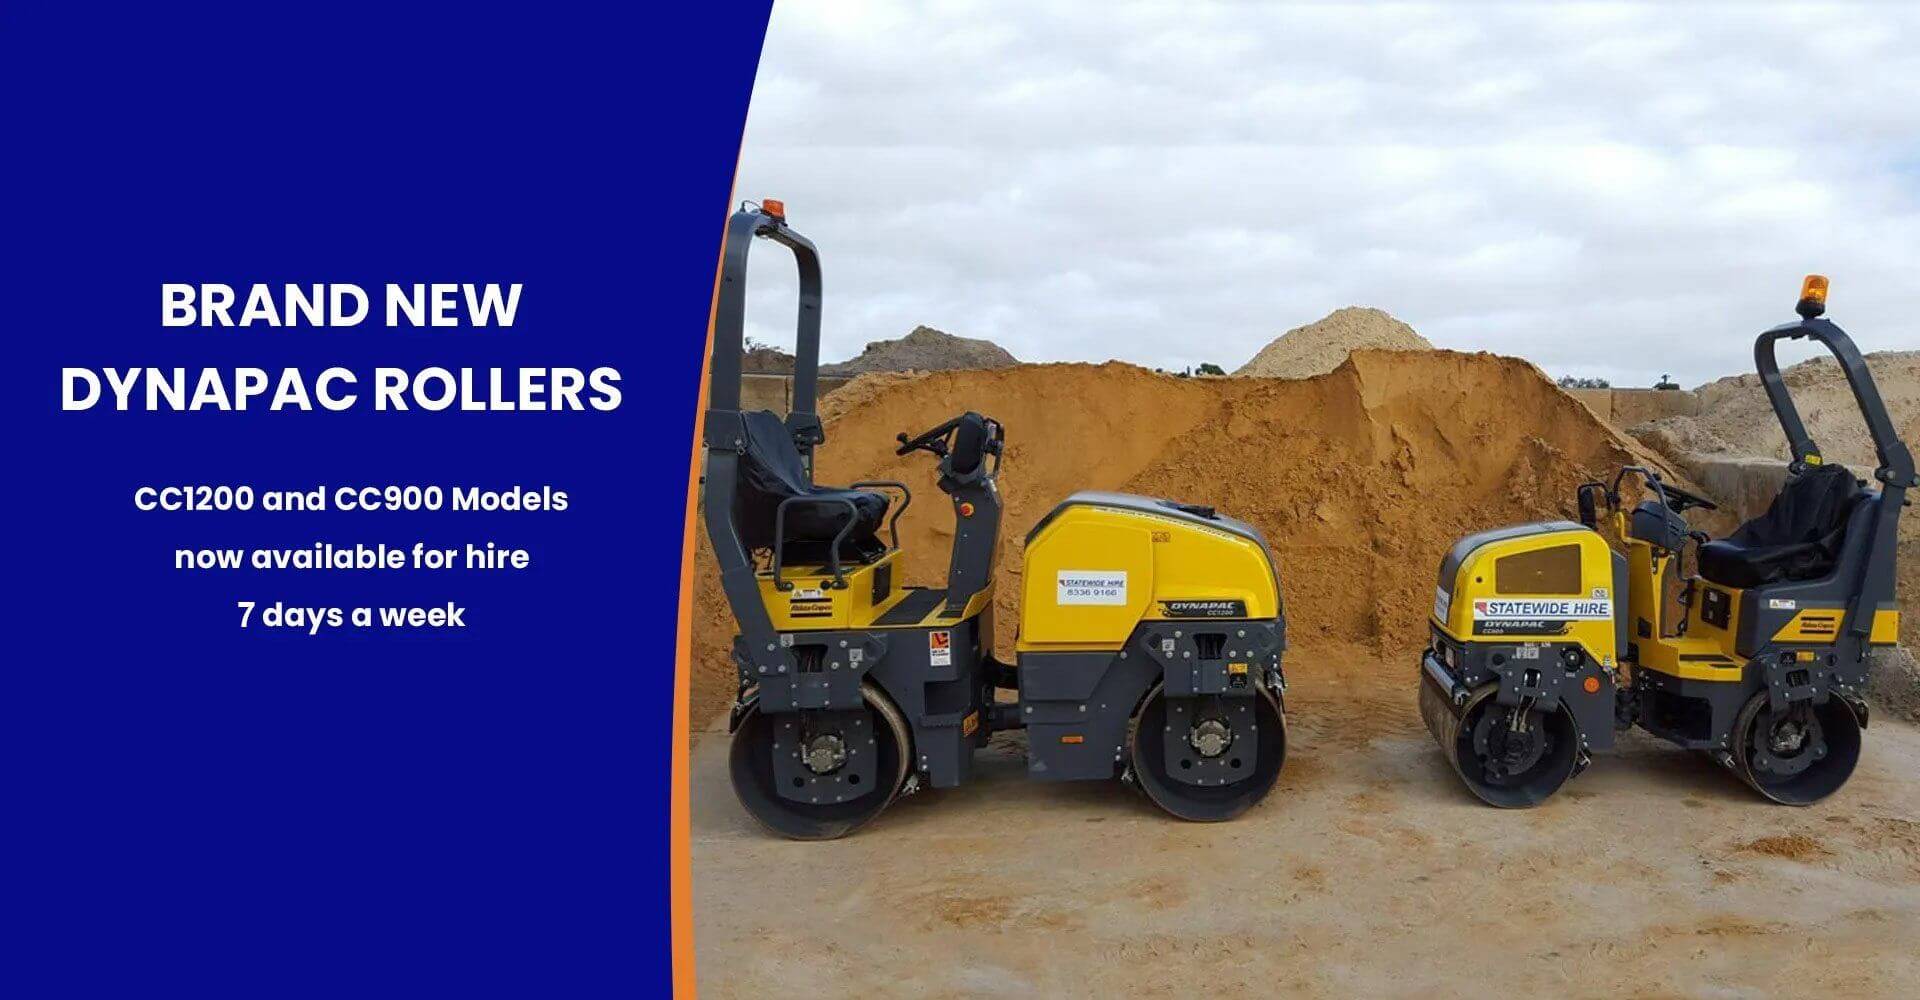 Roller-Hire-CC1200-And-CC900-Models-For-Hire-Dynapac-Rollers-Compaction-Roller-Hire